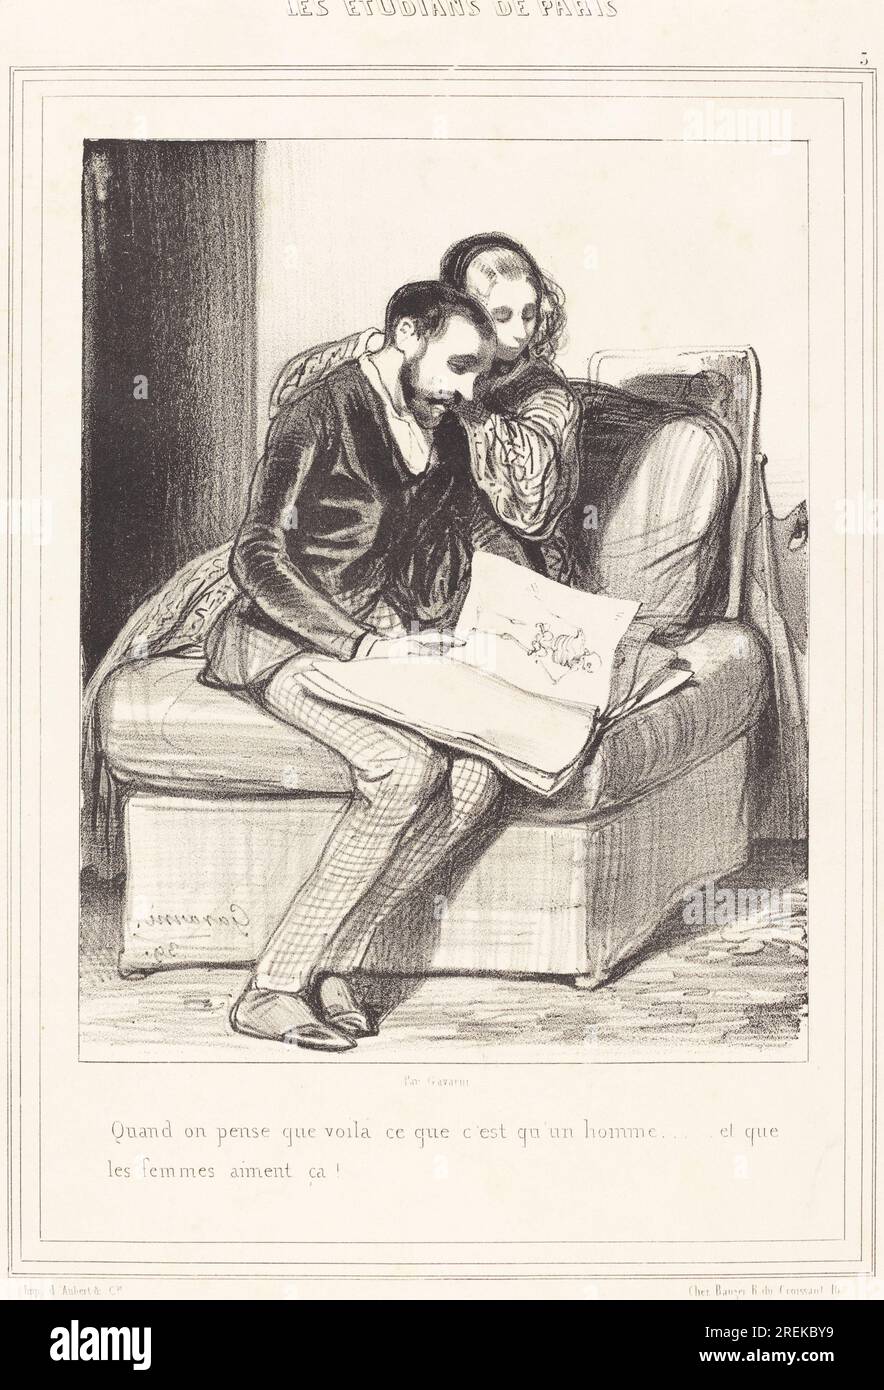 'Paul Gavarni, Quand on pense..., 1839, lithograph, overall: 34.2 x 26.4 cm (13 7/16 x 10 3/8 in.), Gift of Frank Anderson Trapp, 2002.57.23' Stock Photo